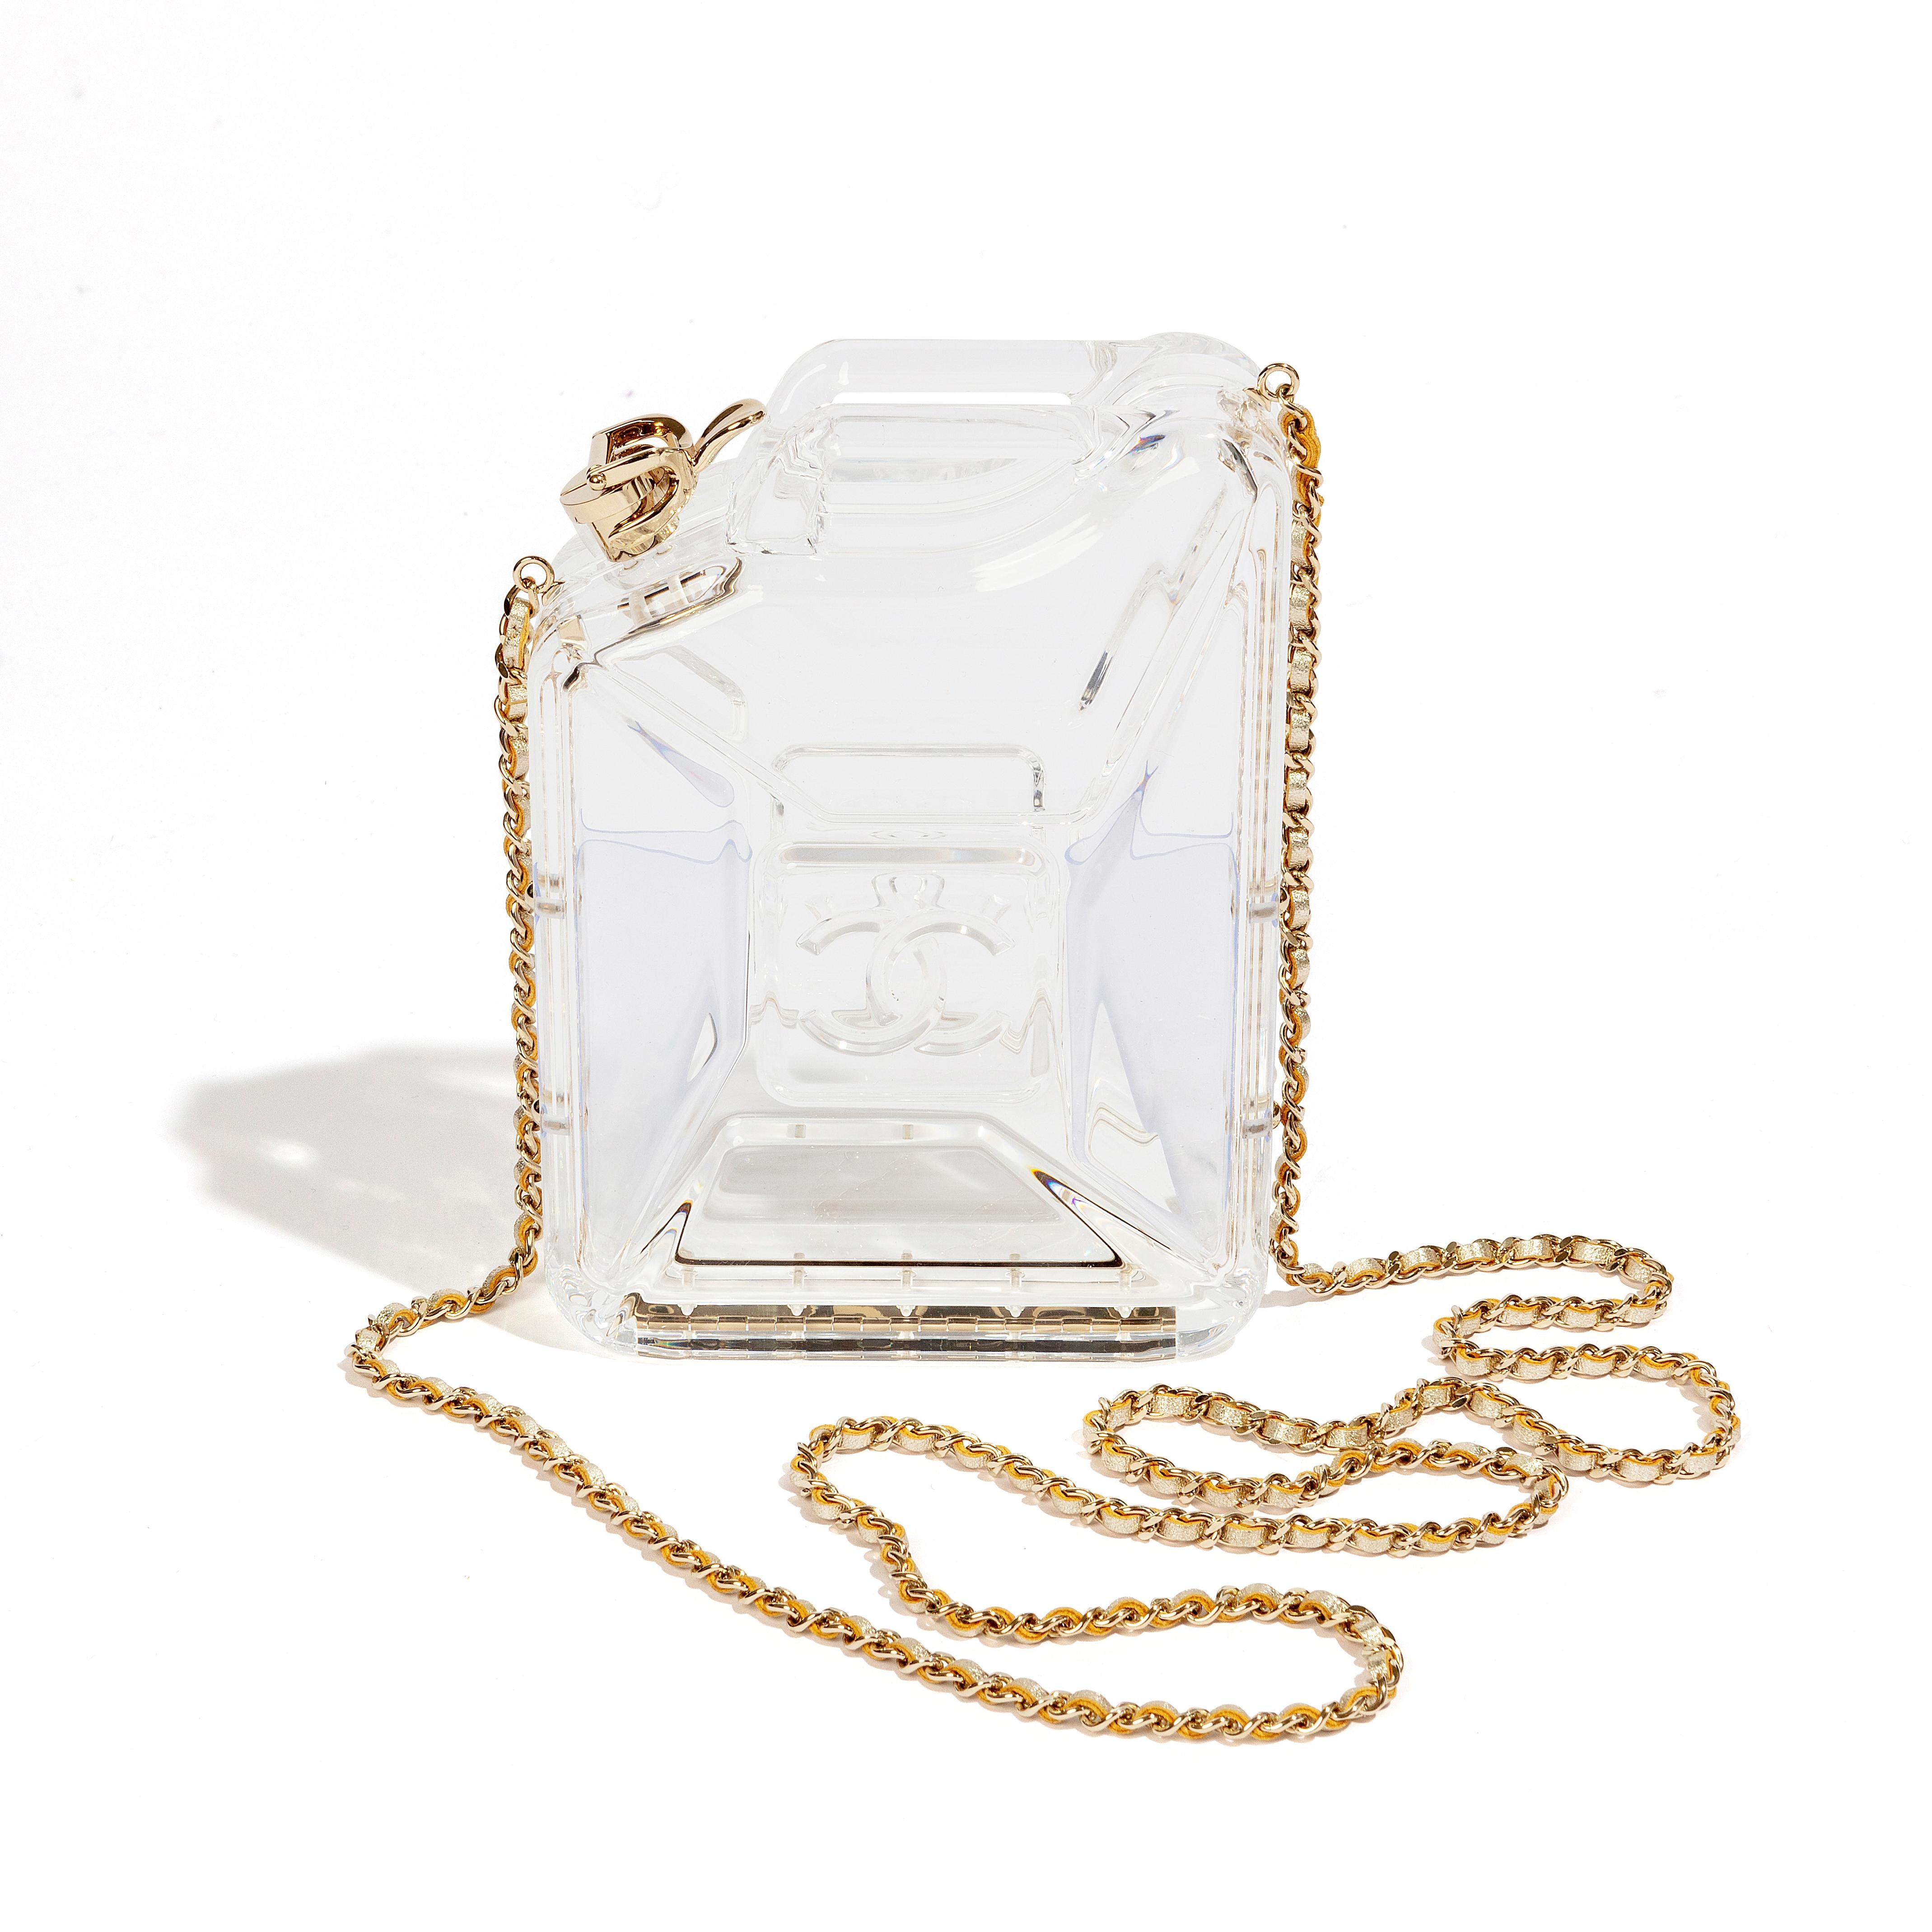 This exquisite item is a Limited Edition 2015 Chanel Dubai By Night Cruise Collection Minaudiere. The clutch is crafted from high-quality clear Plexiglass and features beautiful gold-tone hardware that adds a touch of elegance to the overall design.